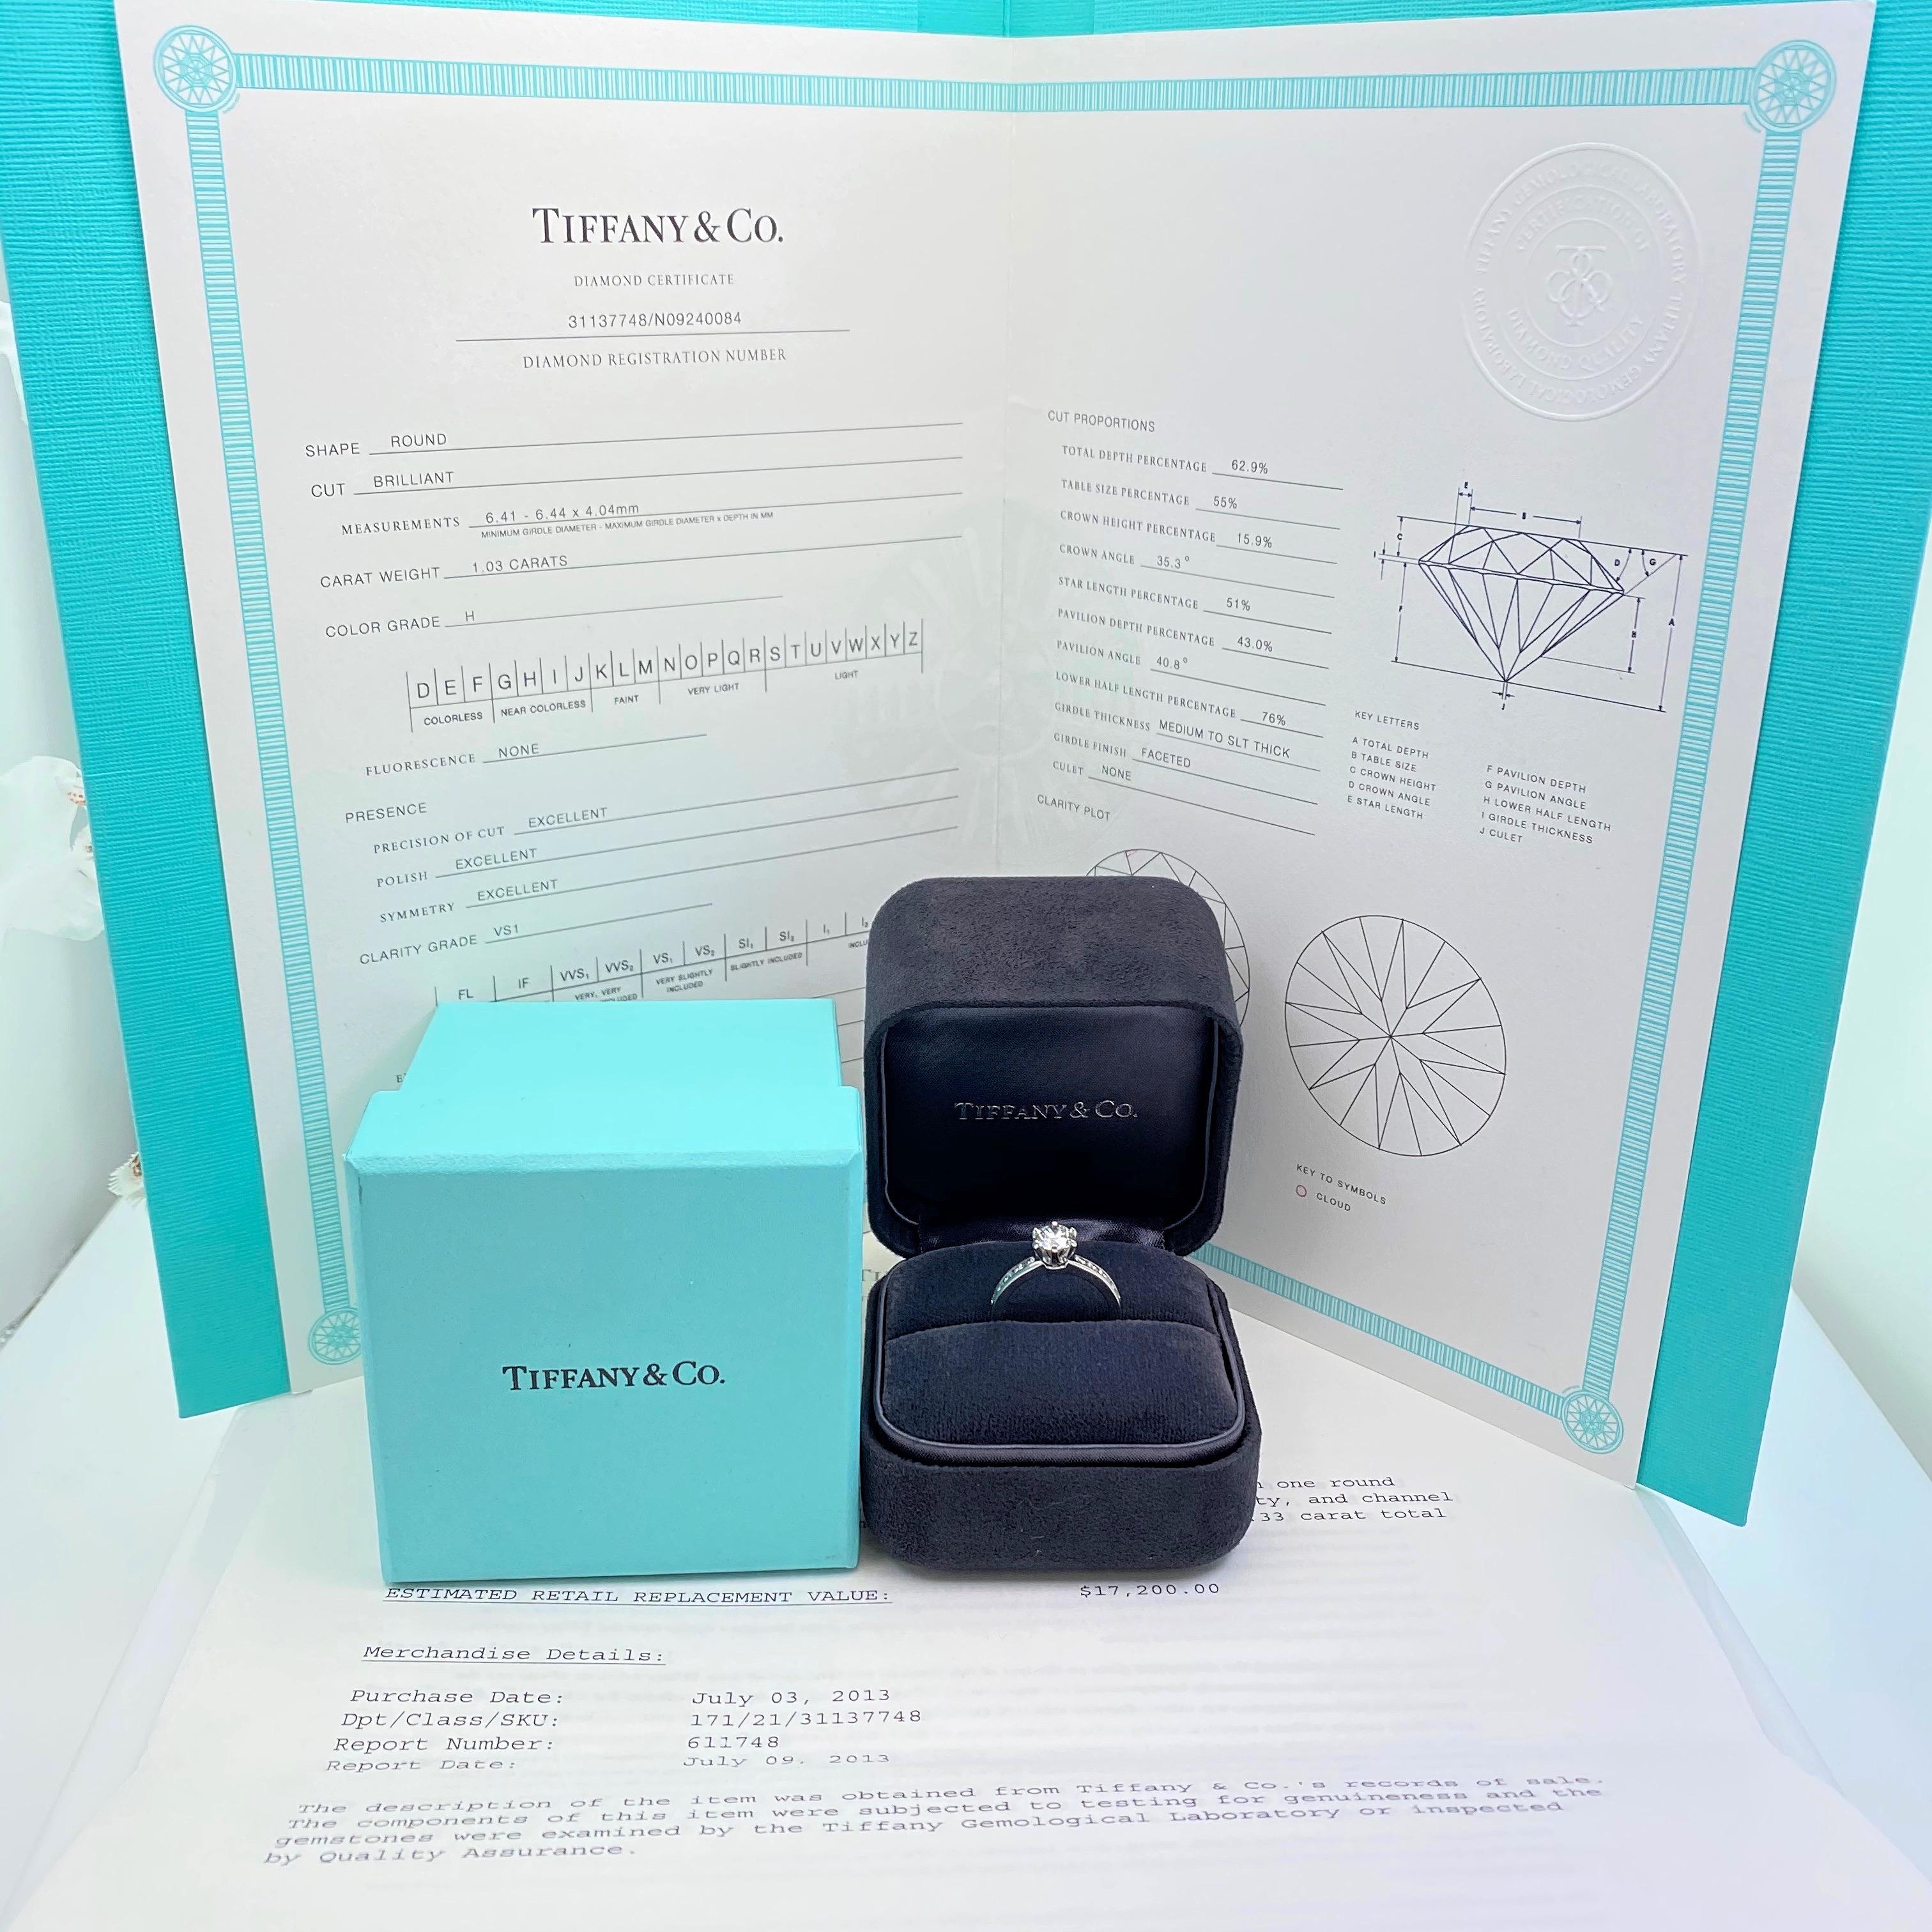 Tiffany & Co Diamond Engagement Ring
Style:  Tiffany Setting with Channel-Set Diamond Band
T&C Diamond Certificate:  31137748/N09240084
Metal:  Platinum PT 950
Size:  6 - sizable
TCW:  1.36 tcw
Main Diamond:  Round Brilliant Diamond 1.03 cts
Color &